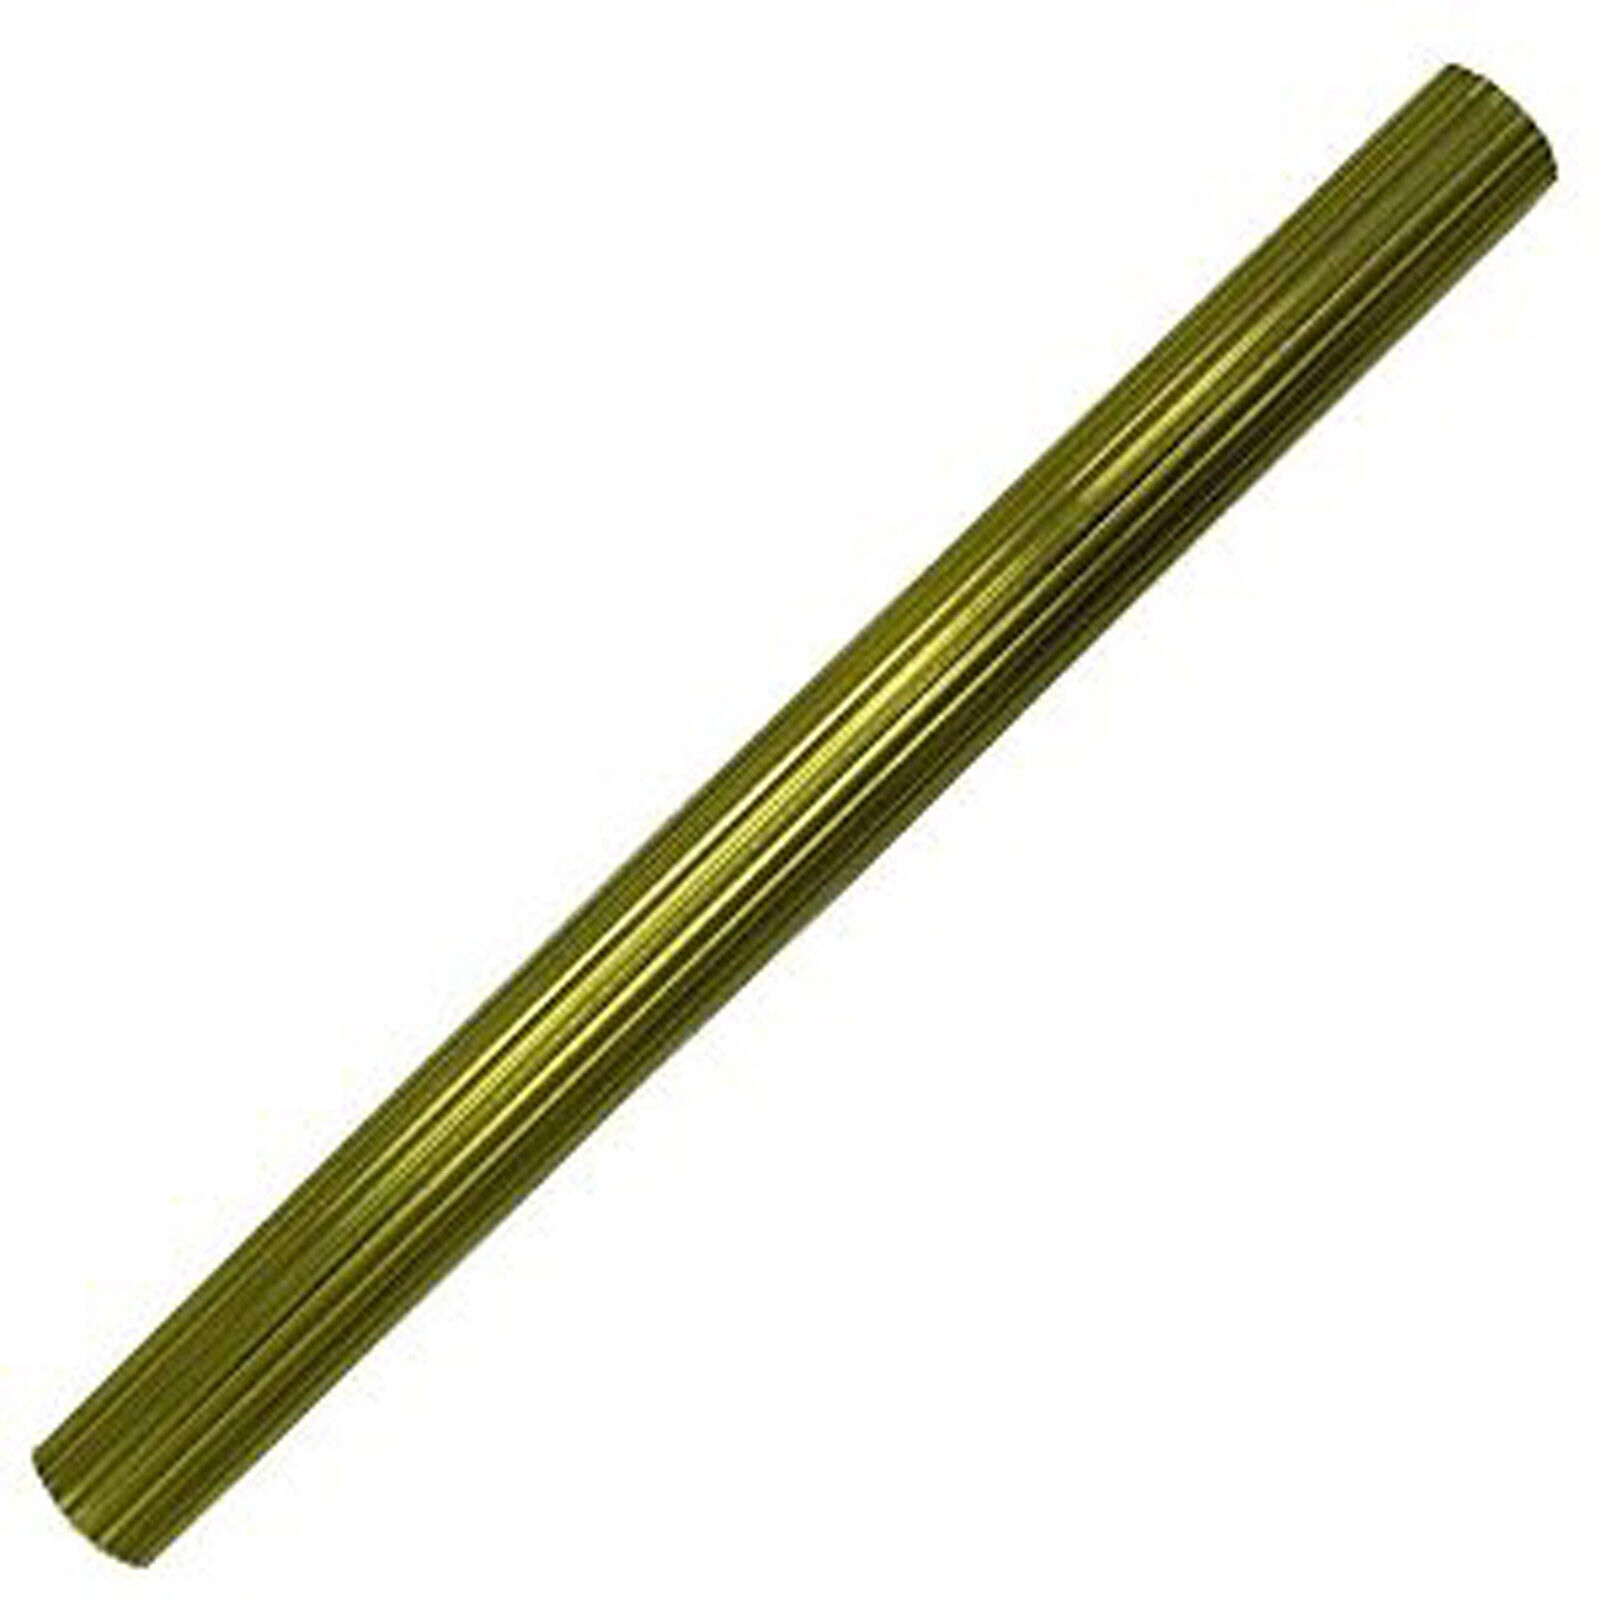 REEDED BRASS TUBE. Inside diameter is 18mm and the outside 20mm overall. 9\